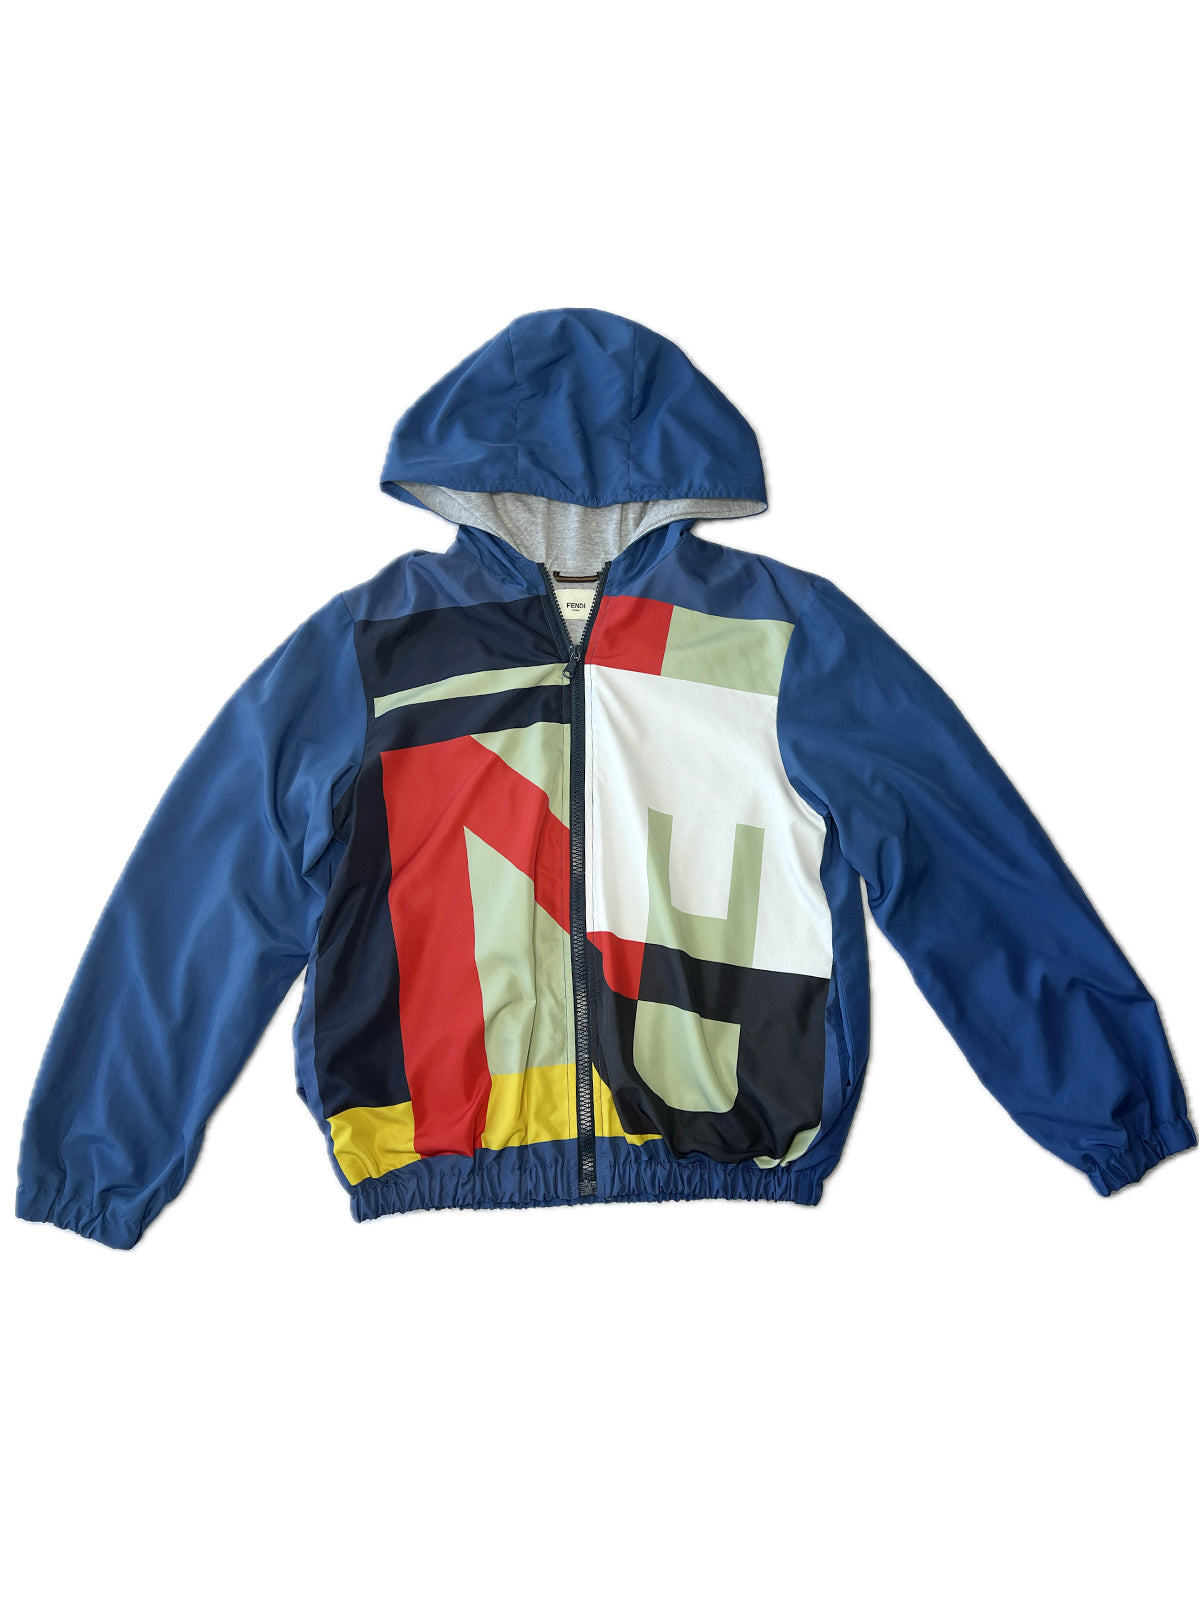 Blue Fendi light jacket with multicoloured print in front and hood. - FENDI